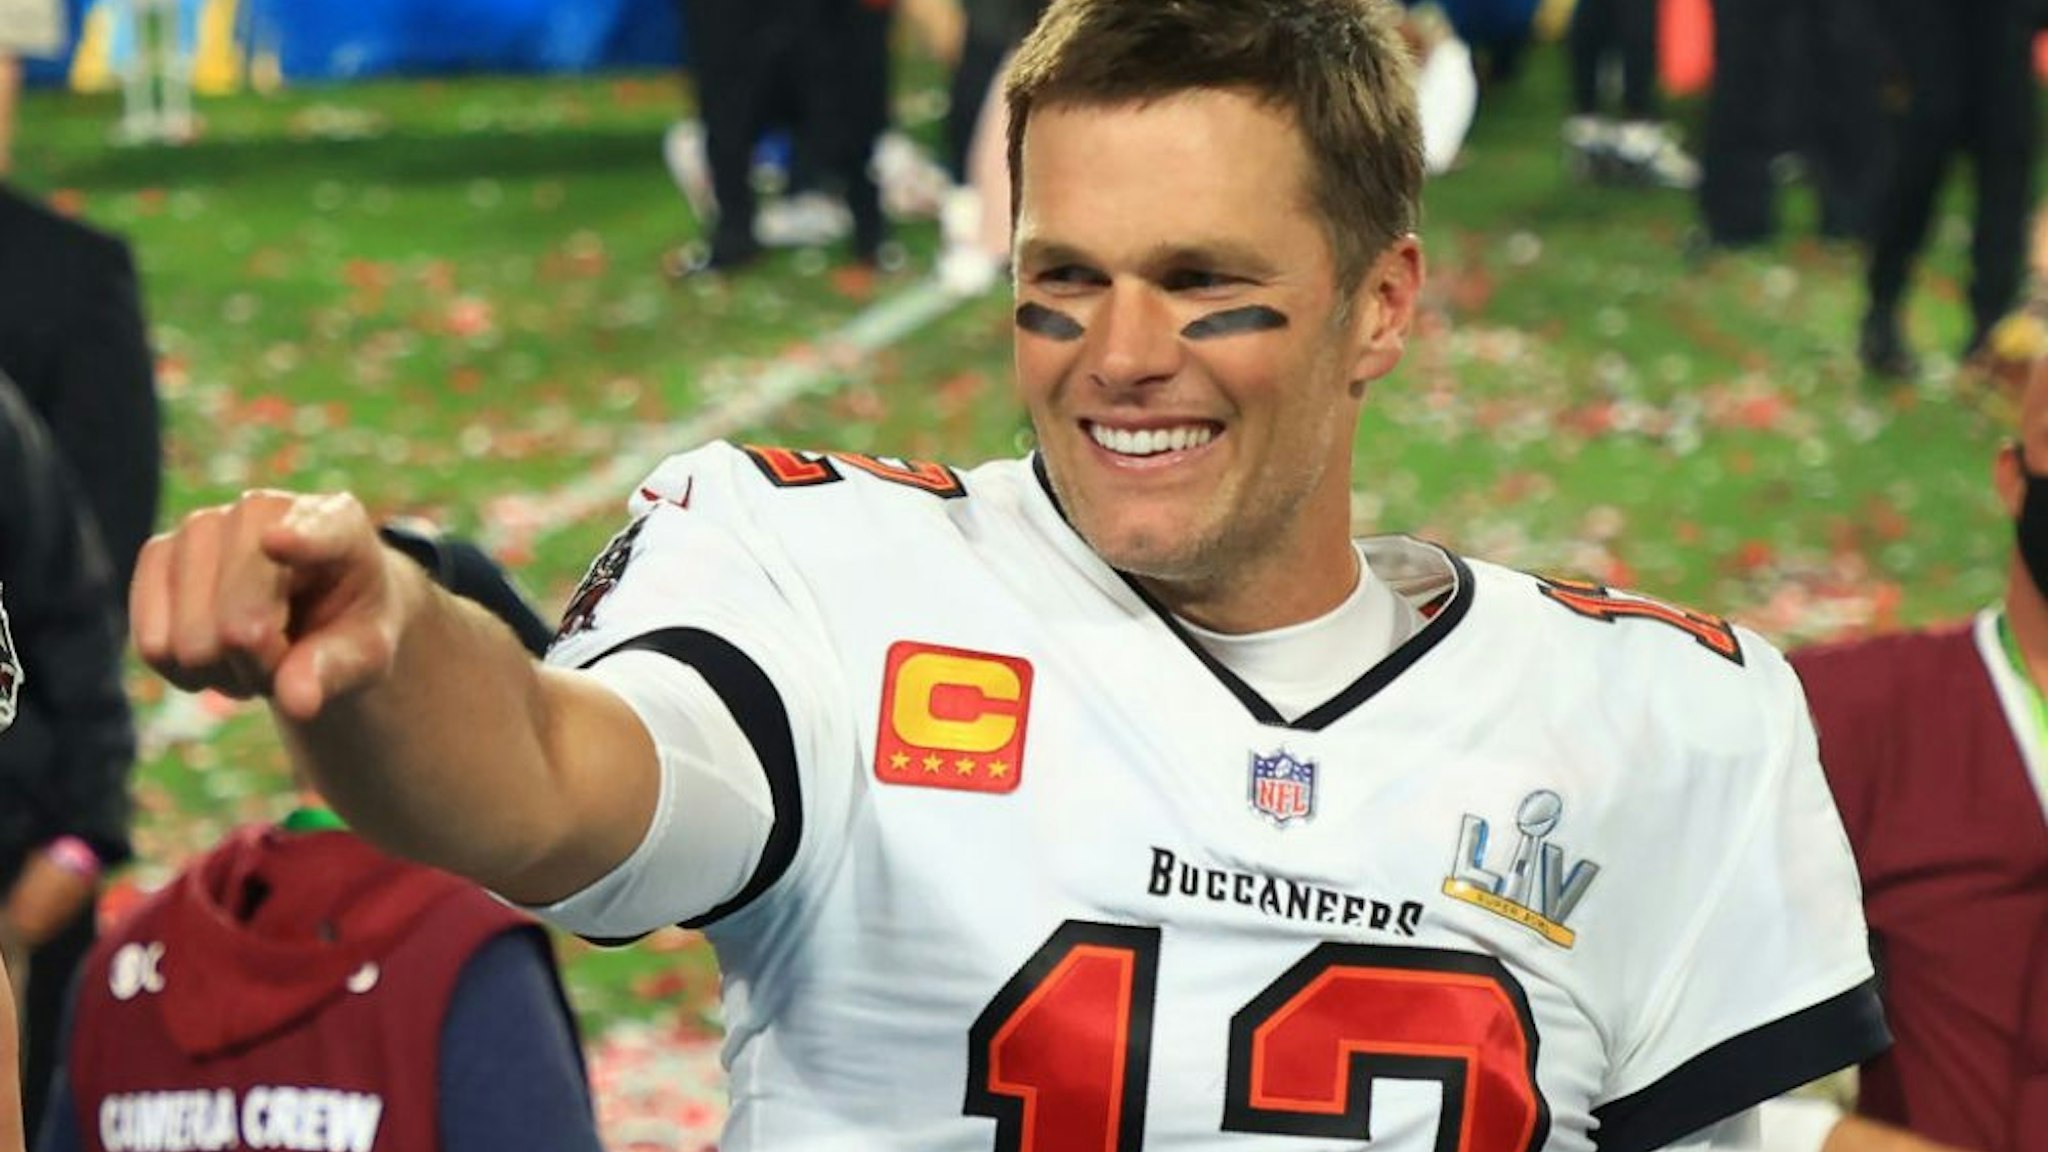 TAMPA, FLORIDA - FEBRUARY 07: Tom Brady #12 of the Tampa Bay Buccaneers celebrates after defeating the Kansas City Chiefs in Super Bowl LV at Raymond James Stadium on February 07, 2021 in Tampa, Florida. The Buccaneers defeated the Chiefs 31-9.